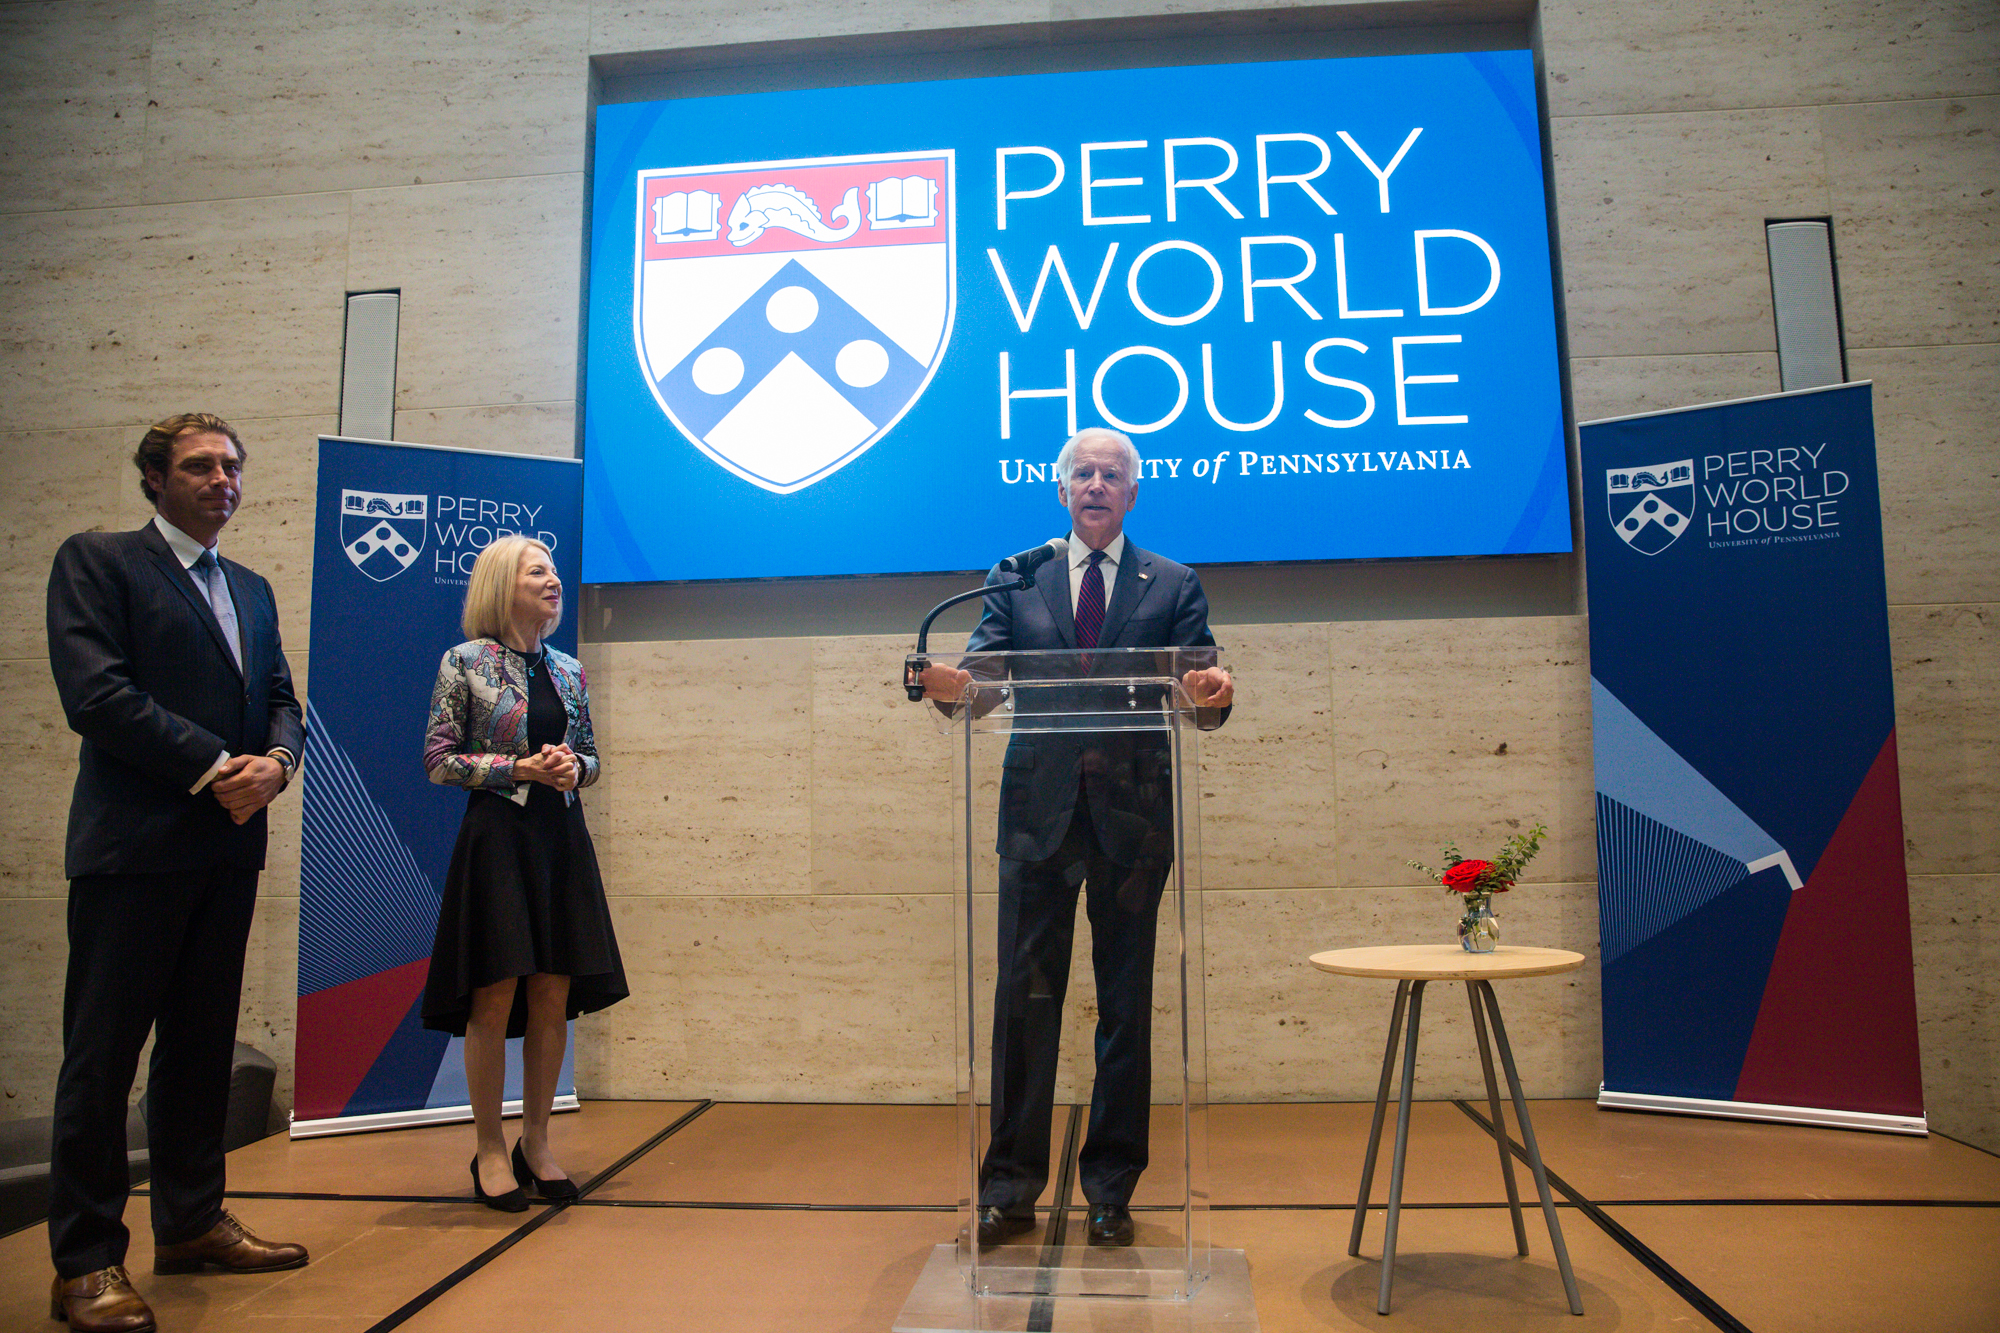 Joe Biden, Amy Gutmann, William Burke-White at Perry World House 2017 global order conference